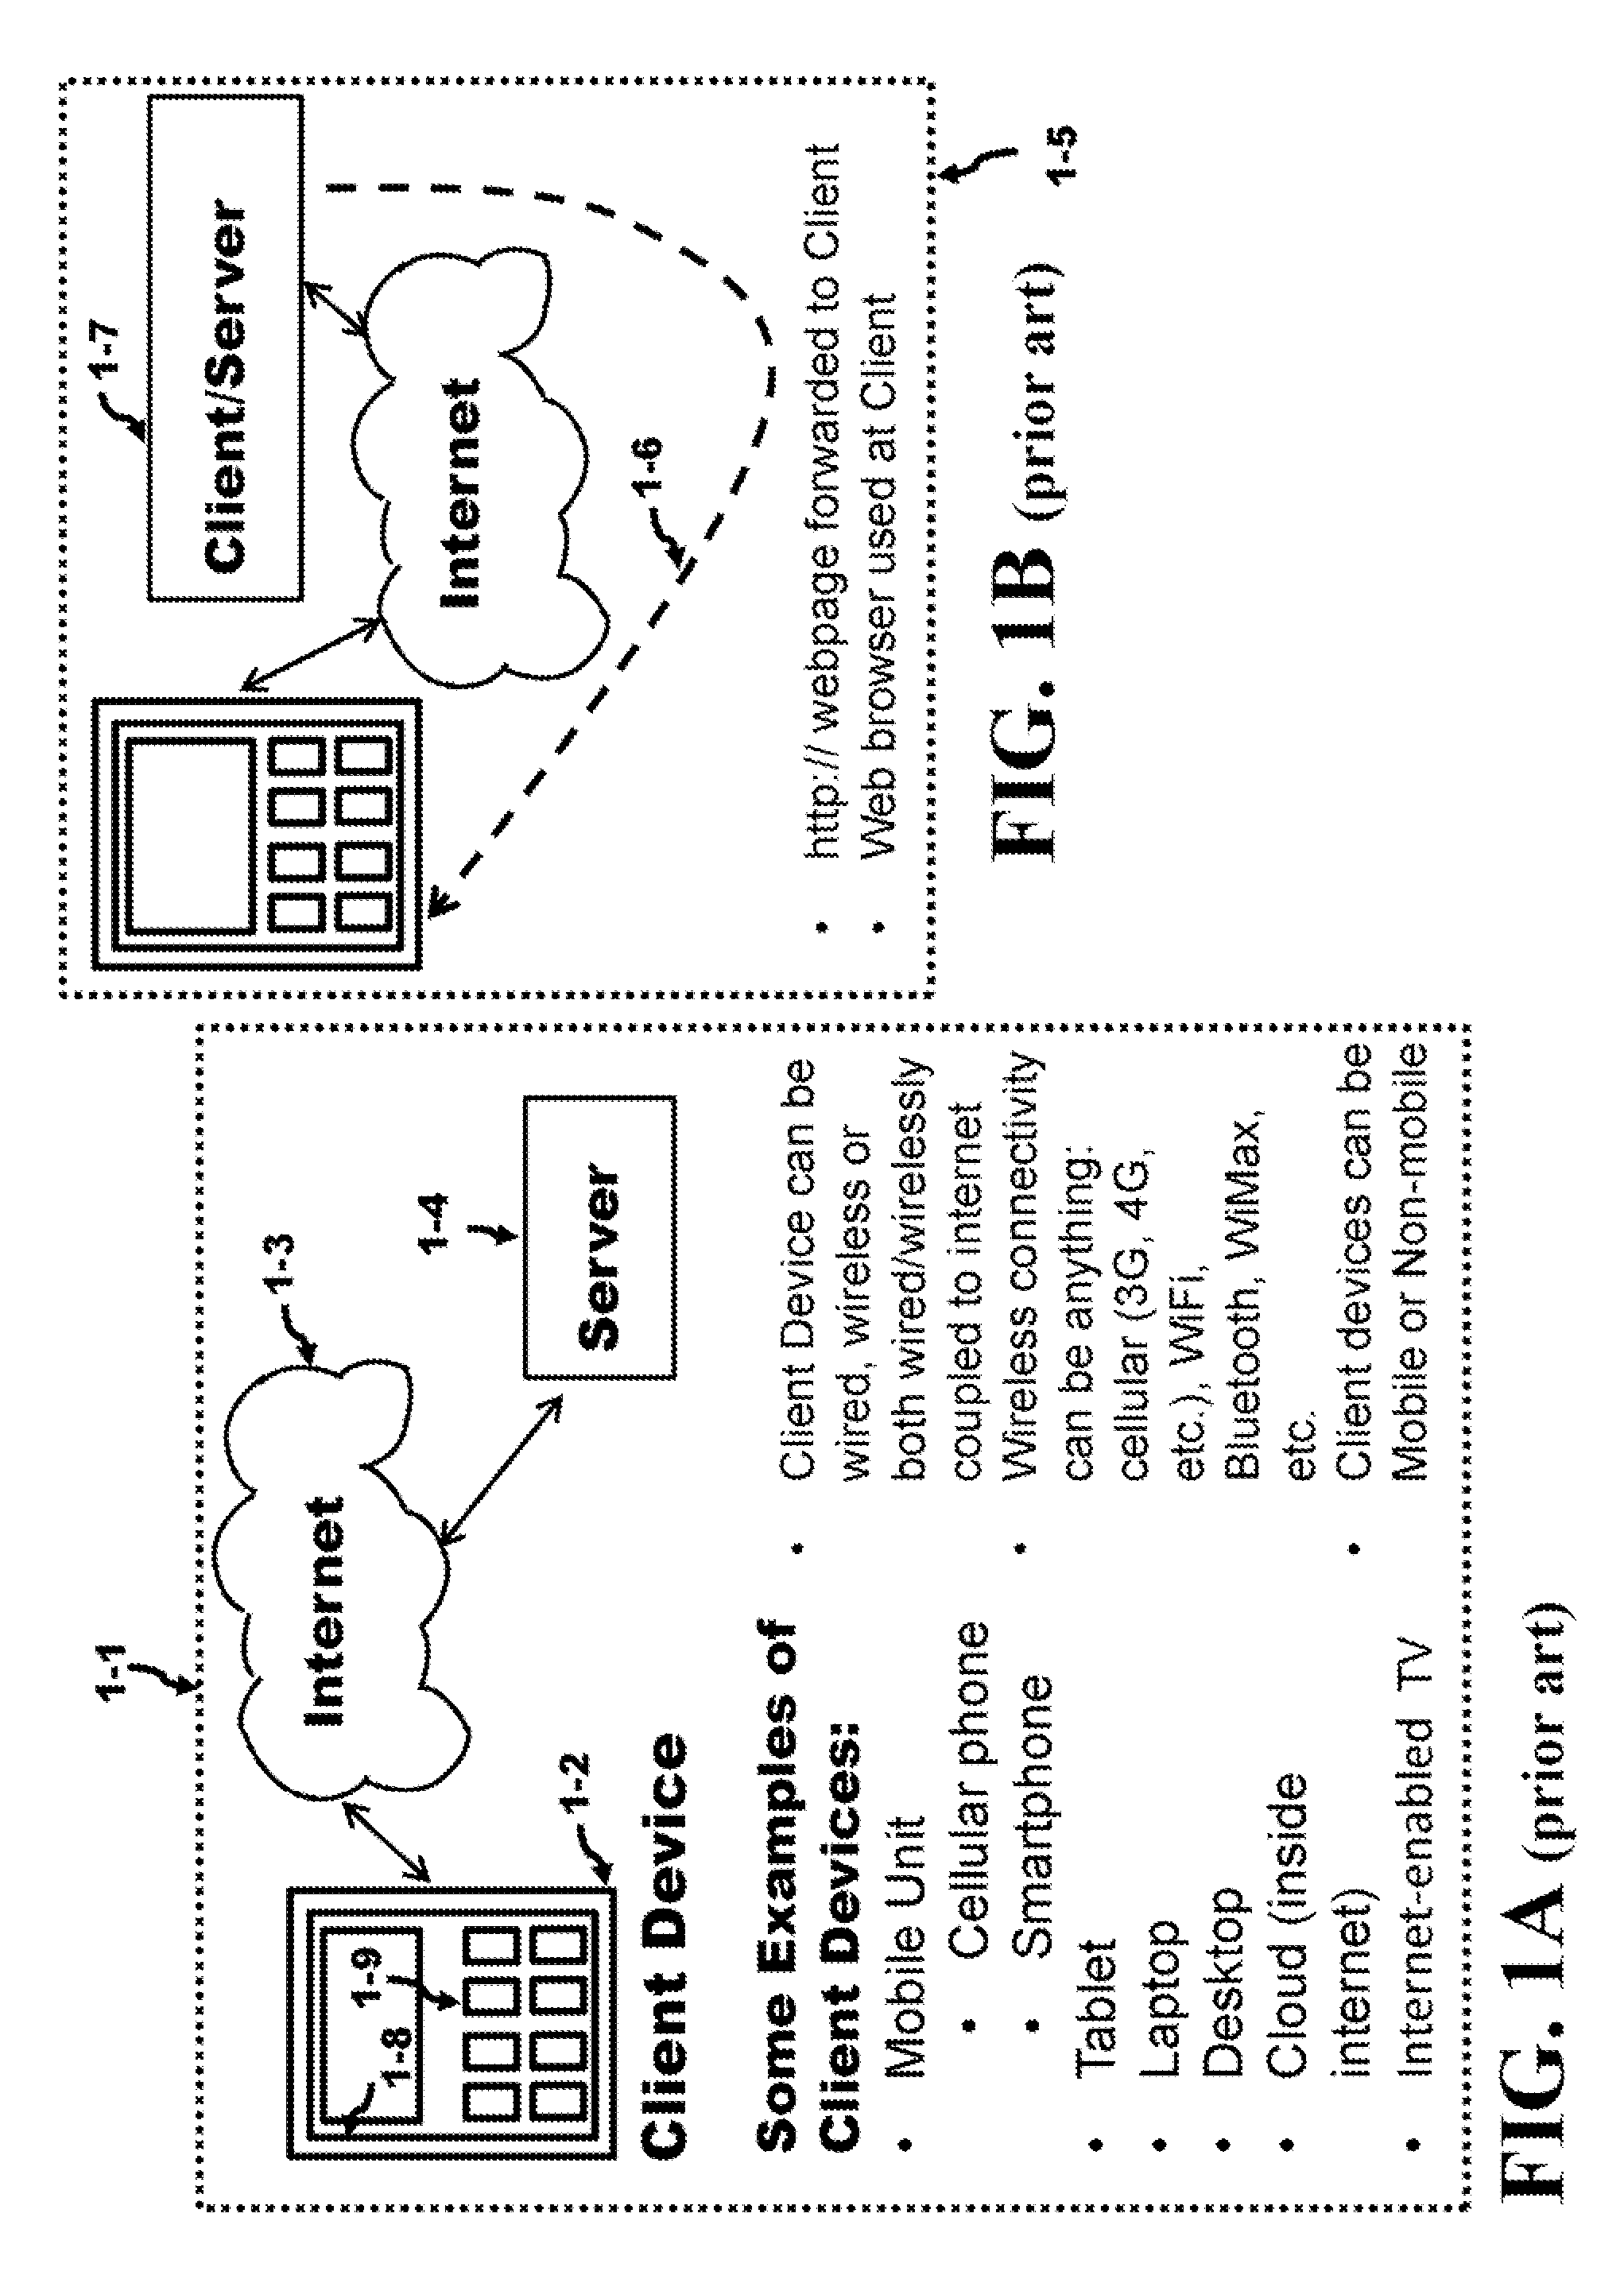 Method for Single Workflow for Multi-Platform Mobile Application Creation and Delivery